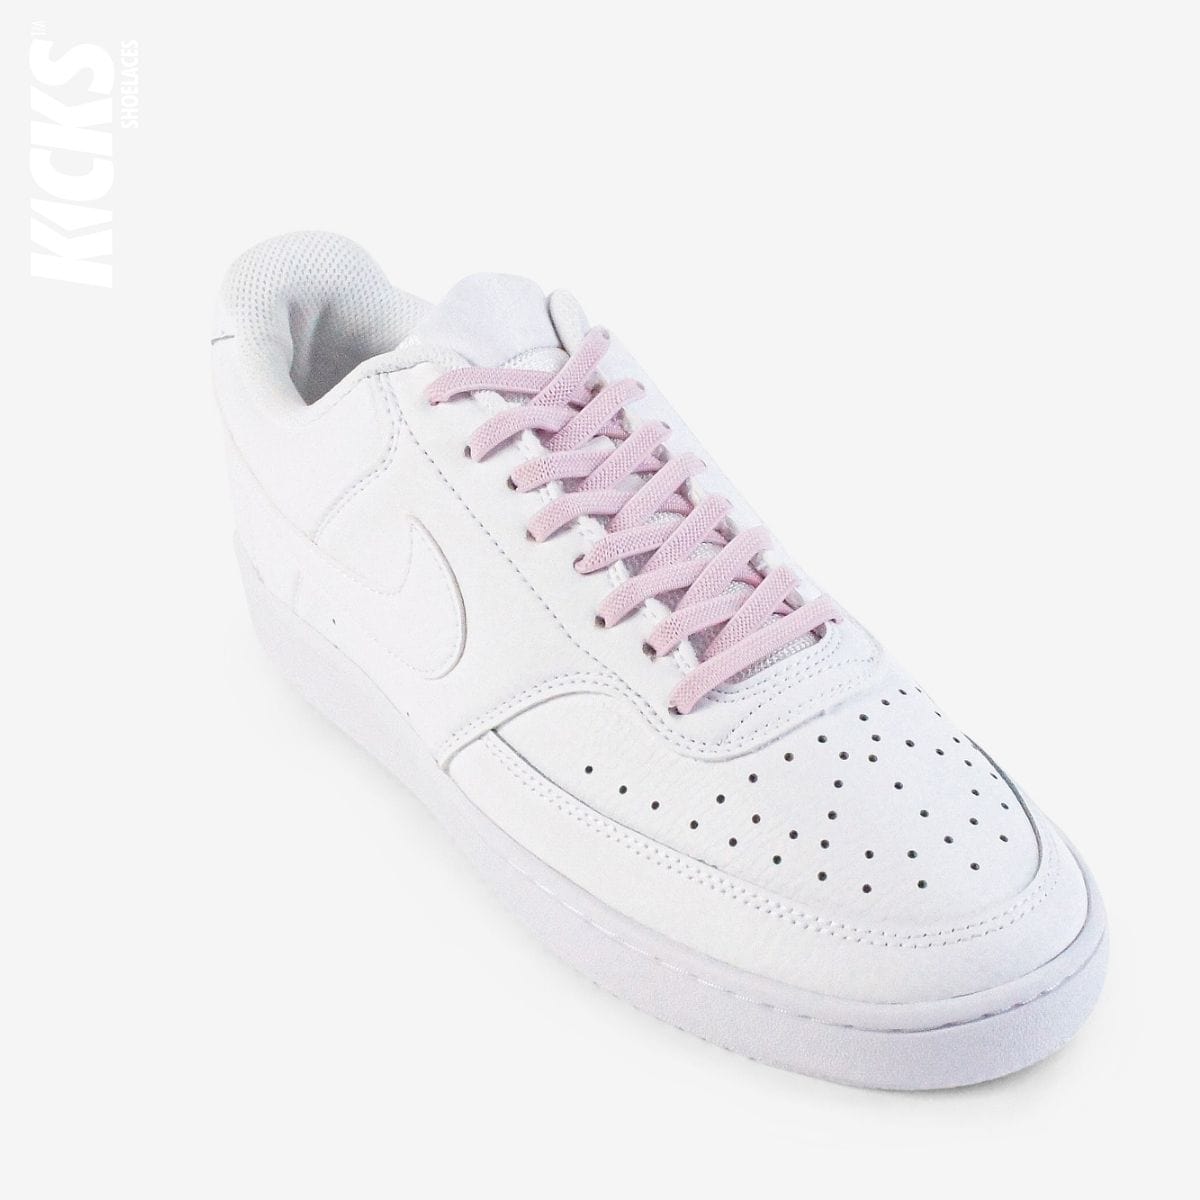 no-tie-shoelaces-with-pink-laces-on-nike-white-sneakers-by-kicks-shoelaces